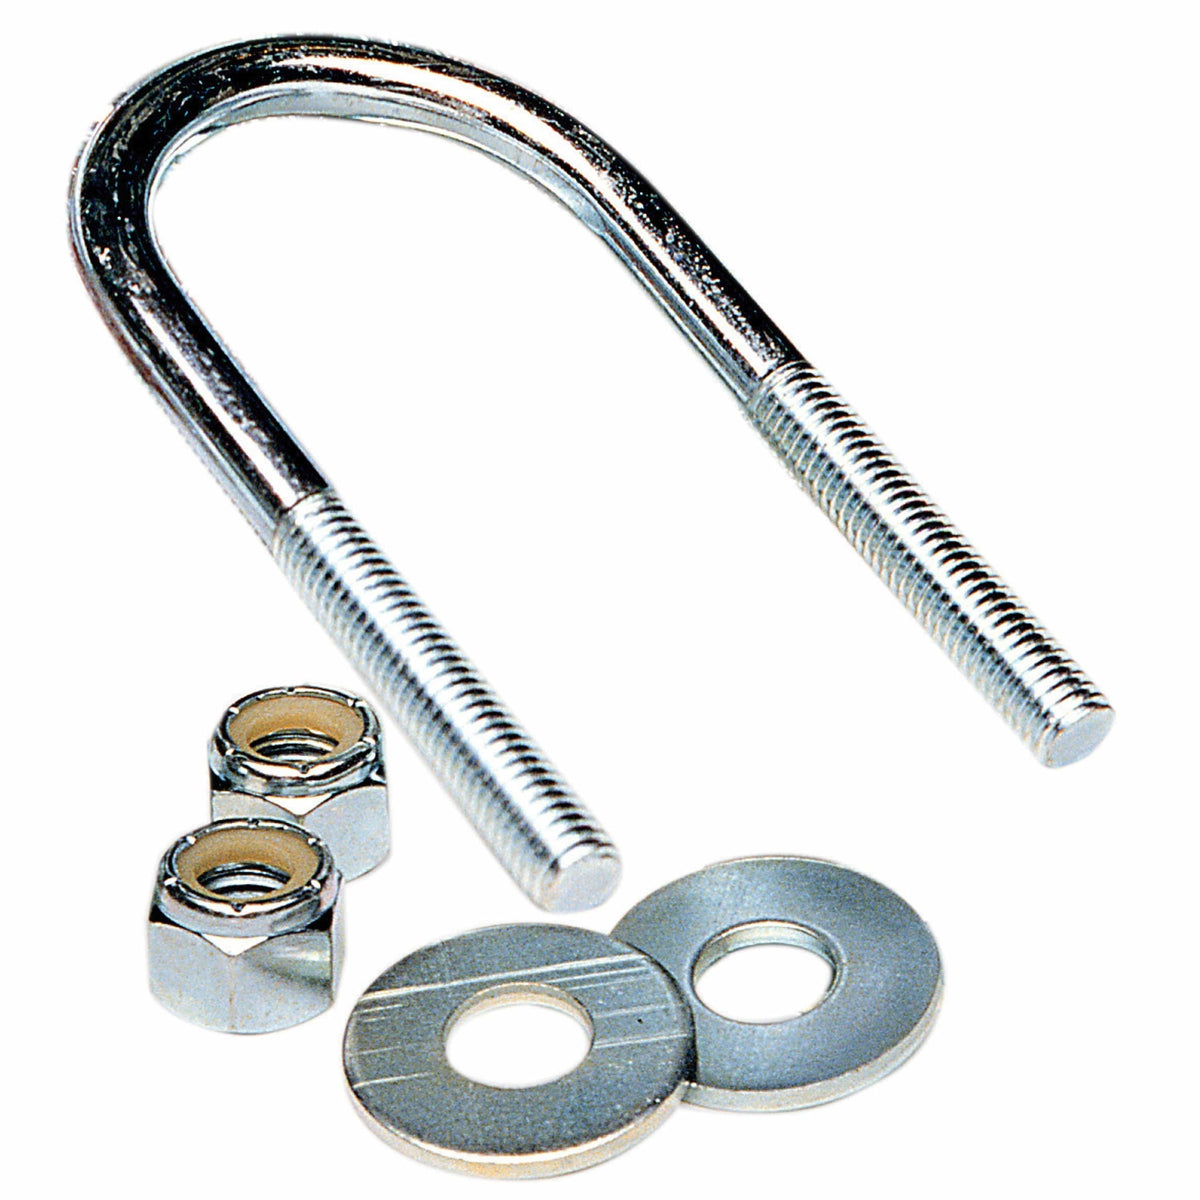 Tie Down Engineering Qualifies for Free Shipping Tie Down U-Bolt Square Pair Zinc Plated 1/2-13" 3-1/8" 4 2" #86826